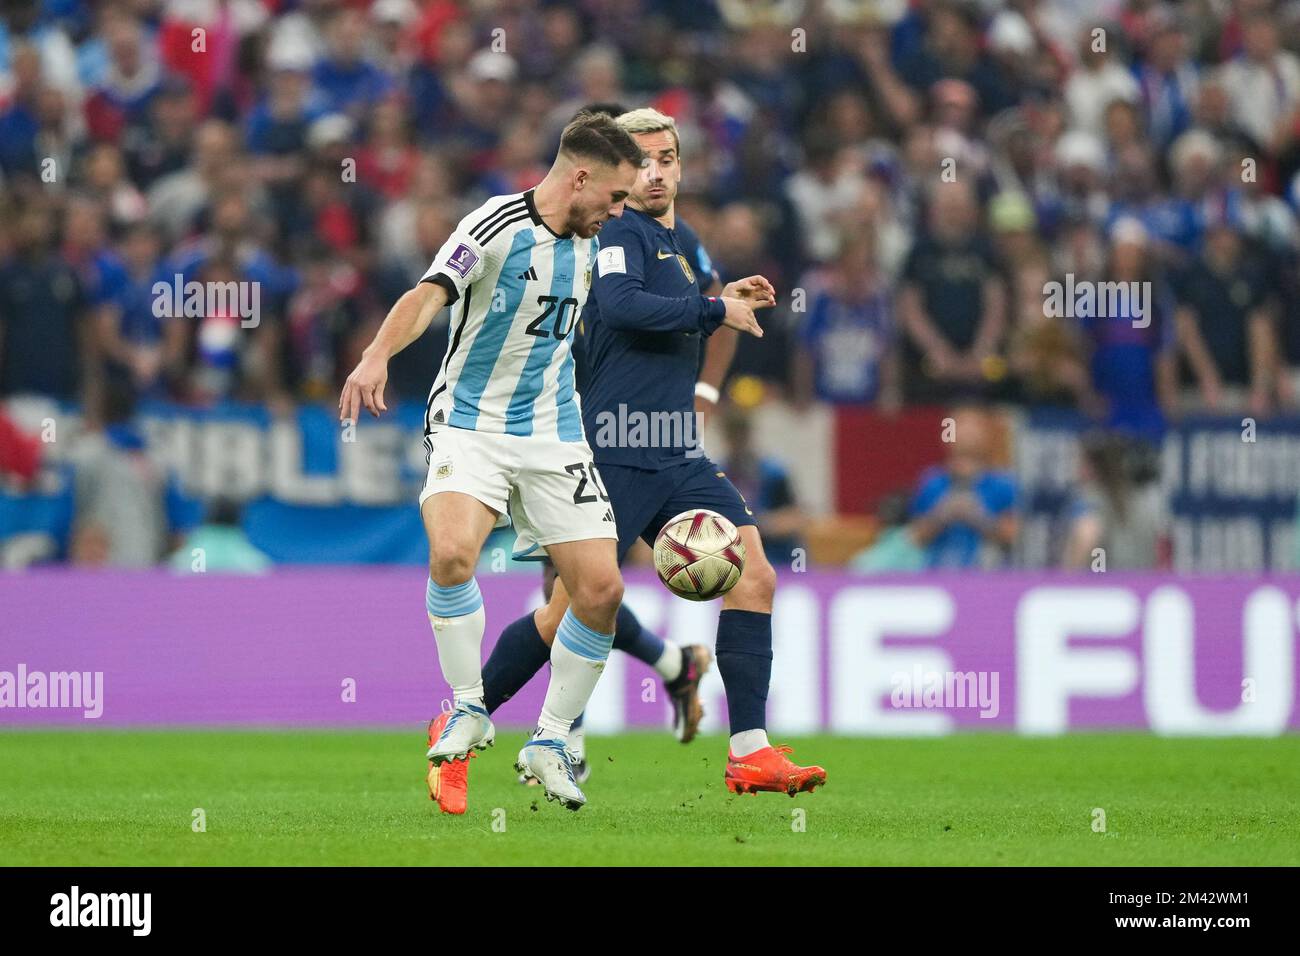 LUSAIL, QATAR - DECEMBER 18: Player of Argentina Alexis Mac Allister fights for the ball with player of France Antoine Griezmann during the FIFA World Cup Qatar 2022 Final match between Argentina and France at Lusail Stadium on December 18, 2022 in Lusail, Qatar. (Photo by Florencia Tan Jun/PxImages) Credit: Px Images/Alamy Live News Stock Photo